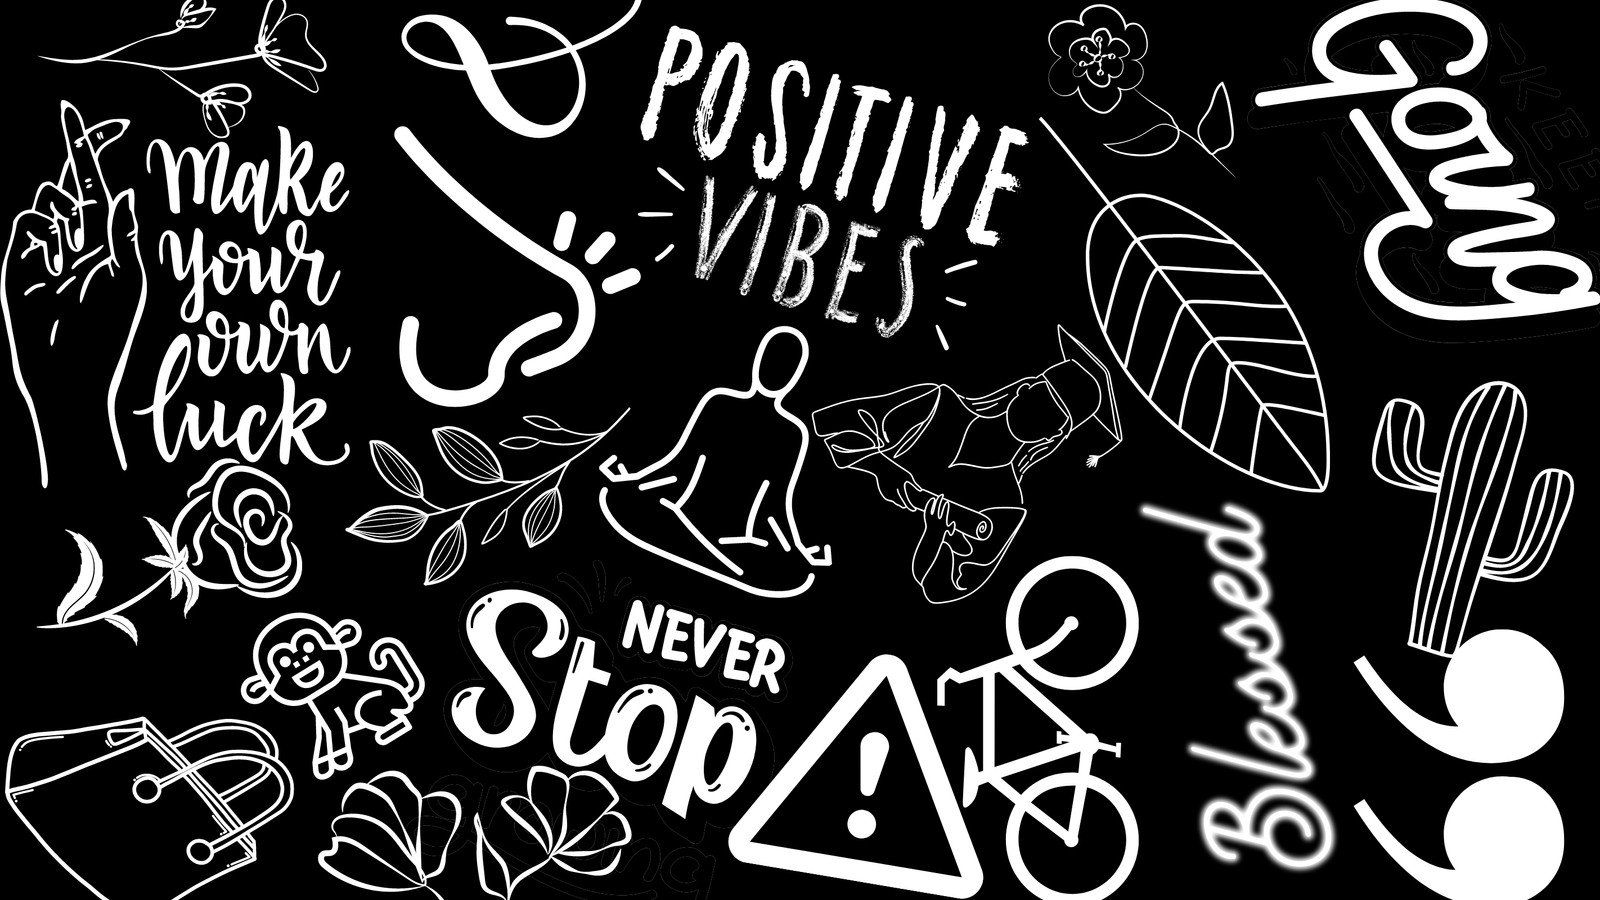 Black and white wallpaper with a lot of stickers on it - Motivational, clean